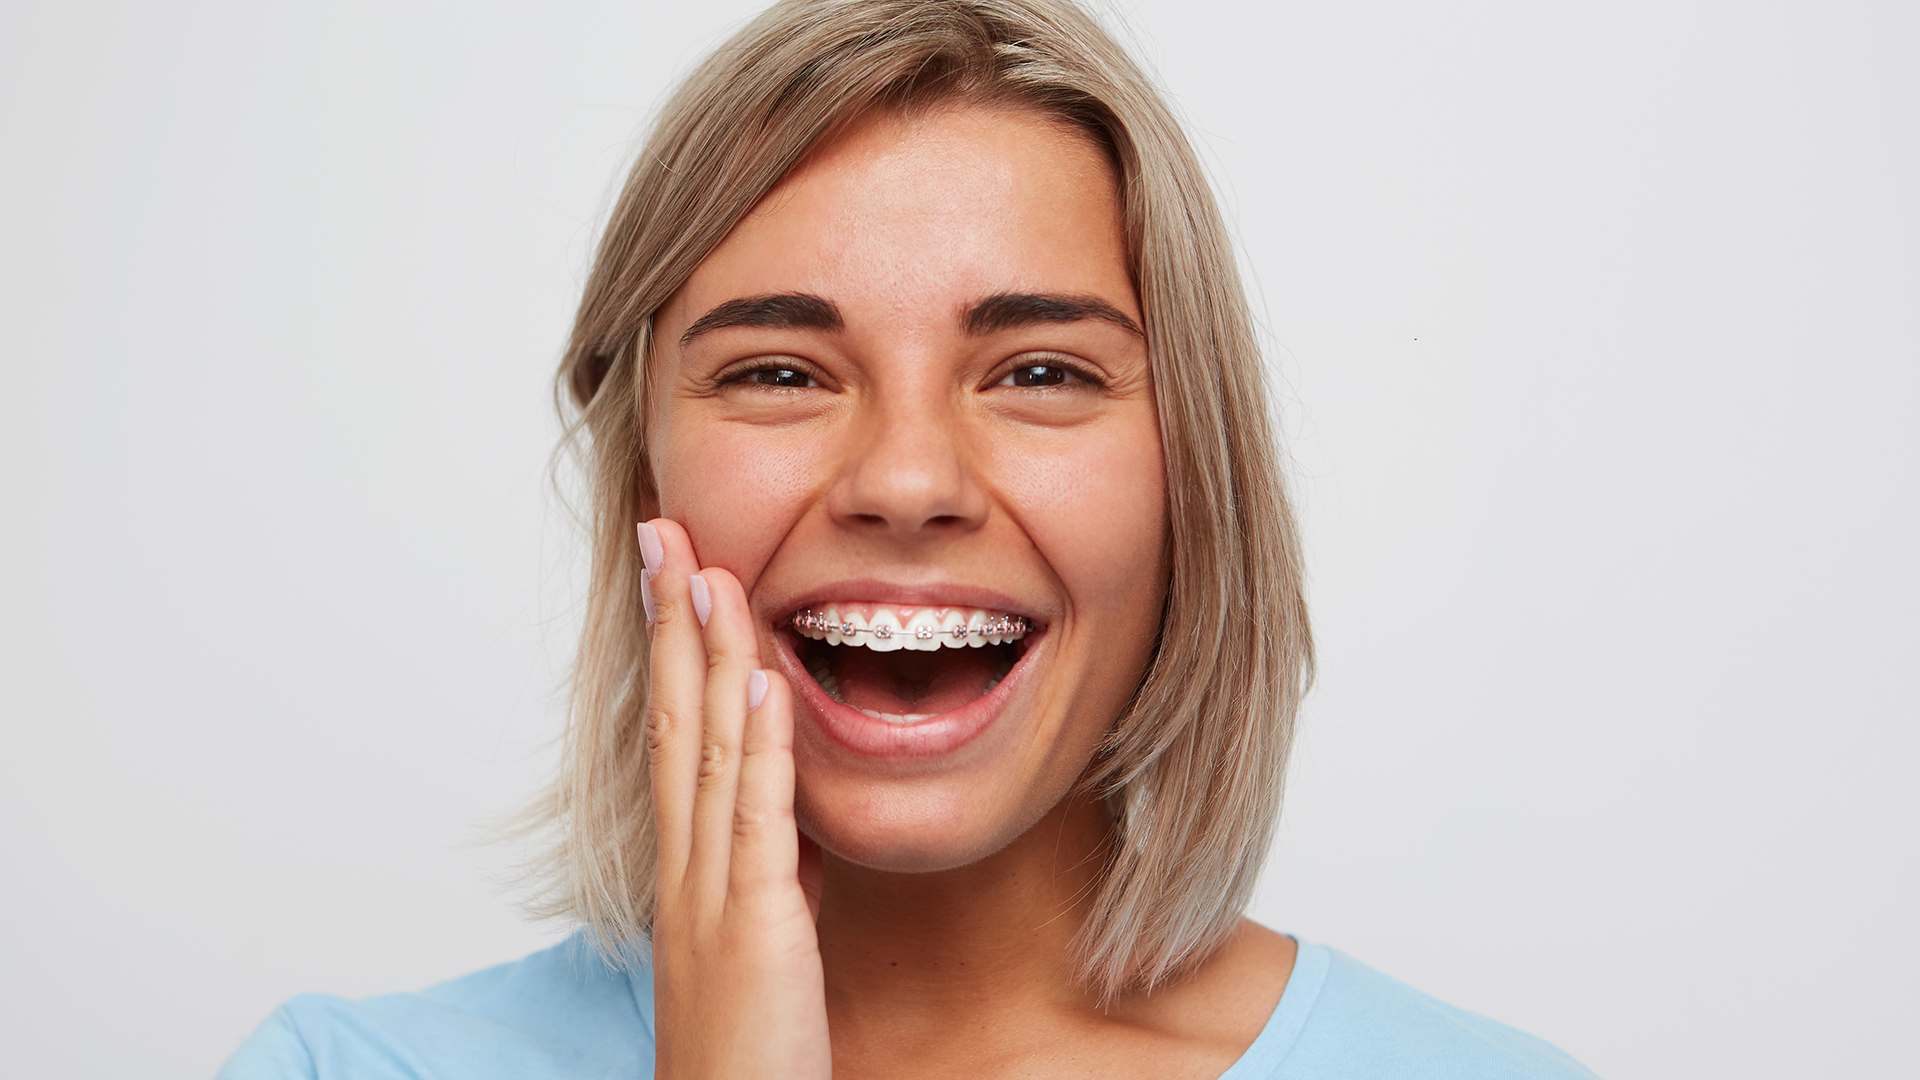 Cheerful beautiful young woman with blonde hair and braces on teeth laughing and touching her face by hand isolated over white background